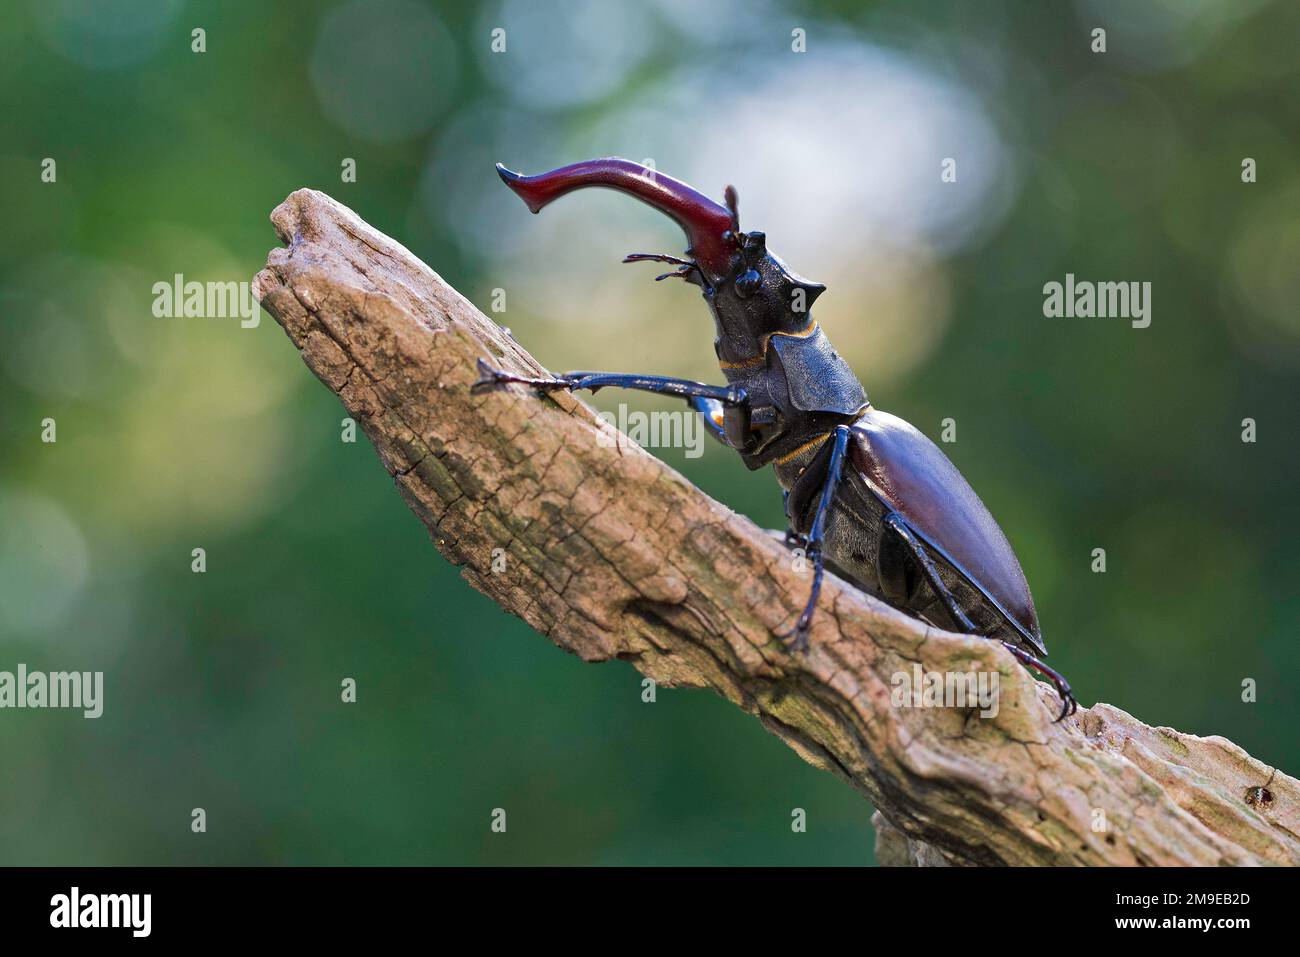 Stag beetle (Lucanus cervus), male with antler-like enlarged mandibles, largest and most conspicuous beetle in Europe, Thuringia, Germany Stock Photo